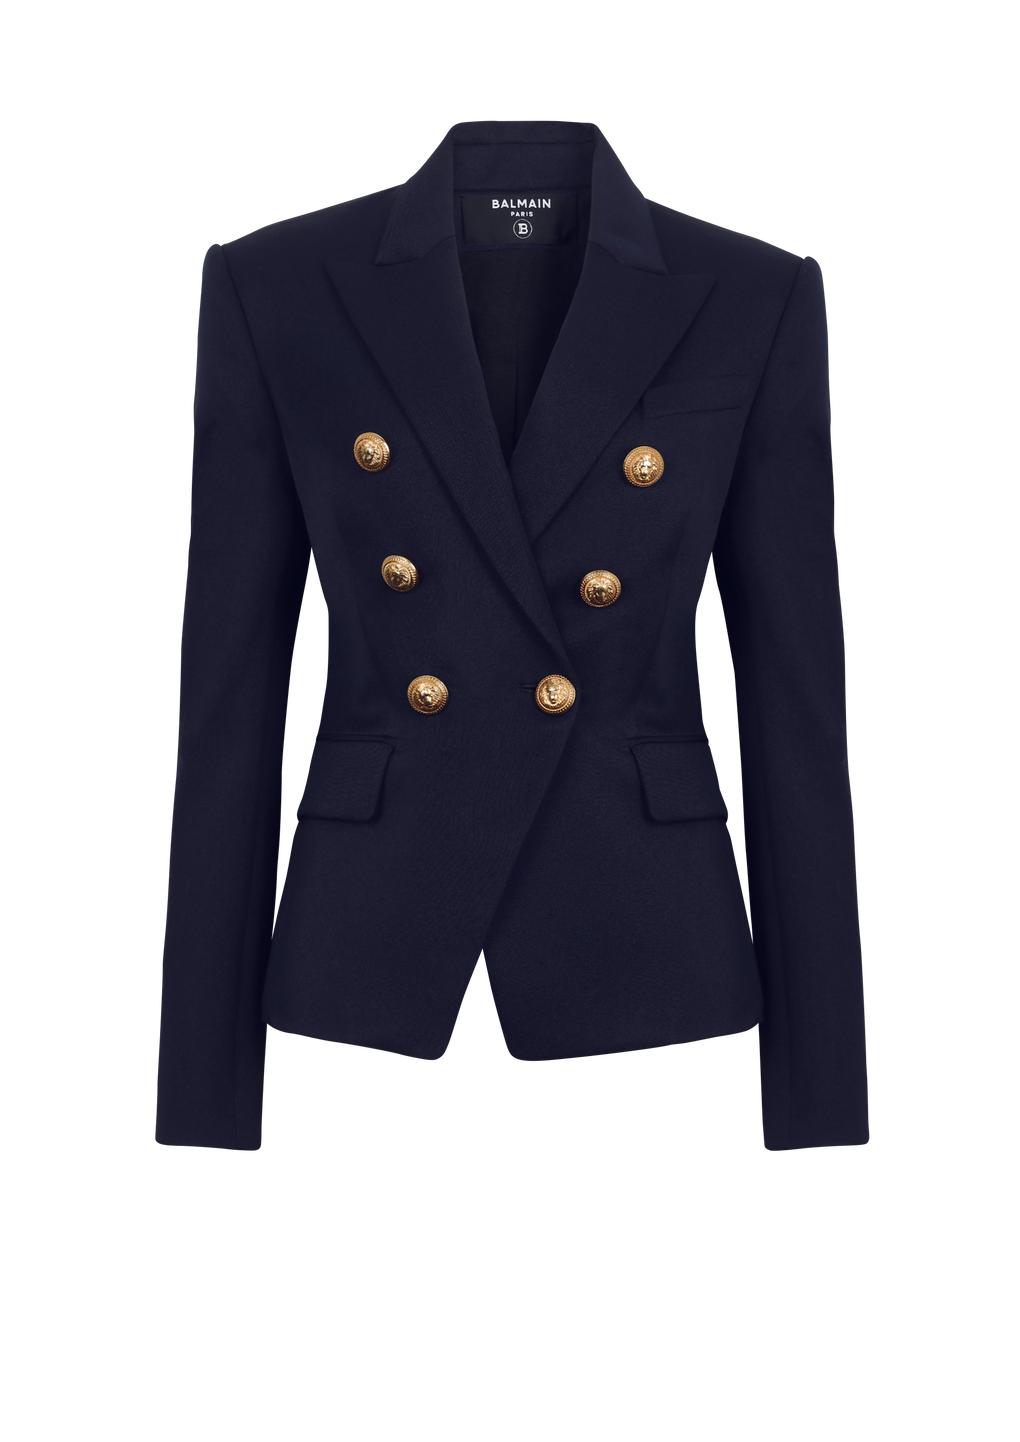 Wool double-breasted jacket, navy, hi-res